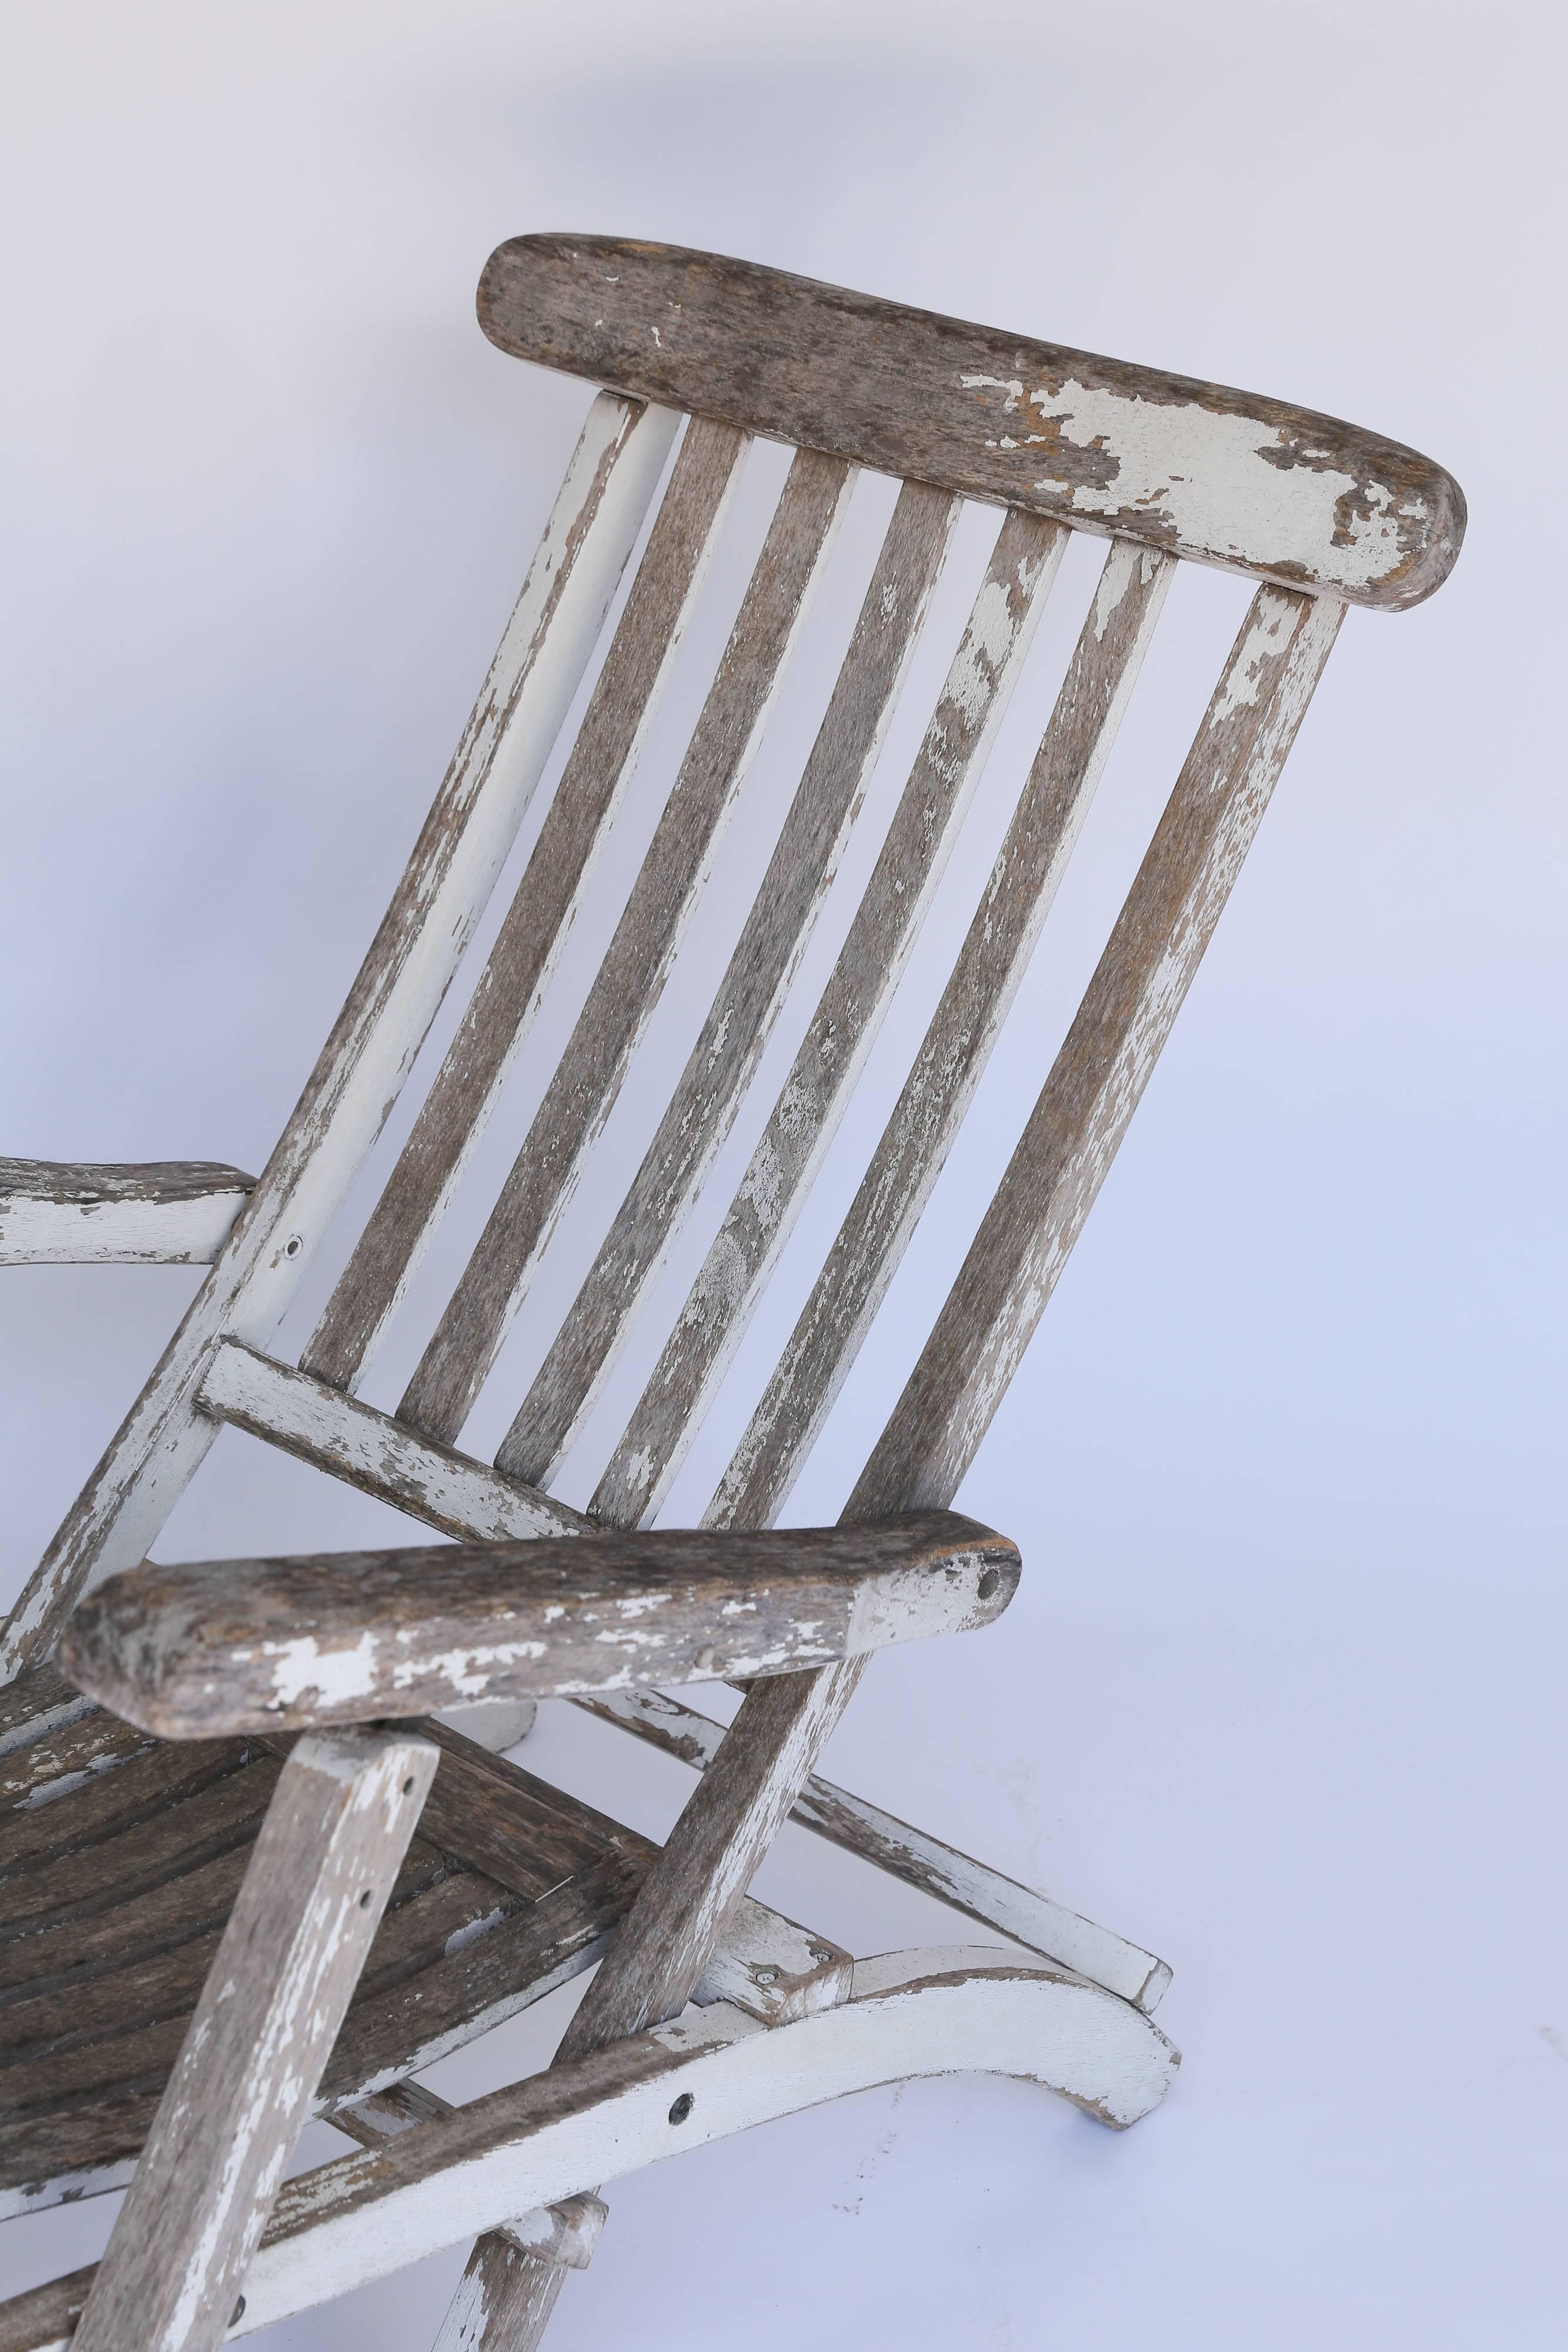 An iconic wood deck chair from France. Still strong and sturdy, traces of it's original white paint remain scattered over a surface that has primarily worn down to the original wood. Adjustable back and leg rest, the chair folds for easy storing.